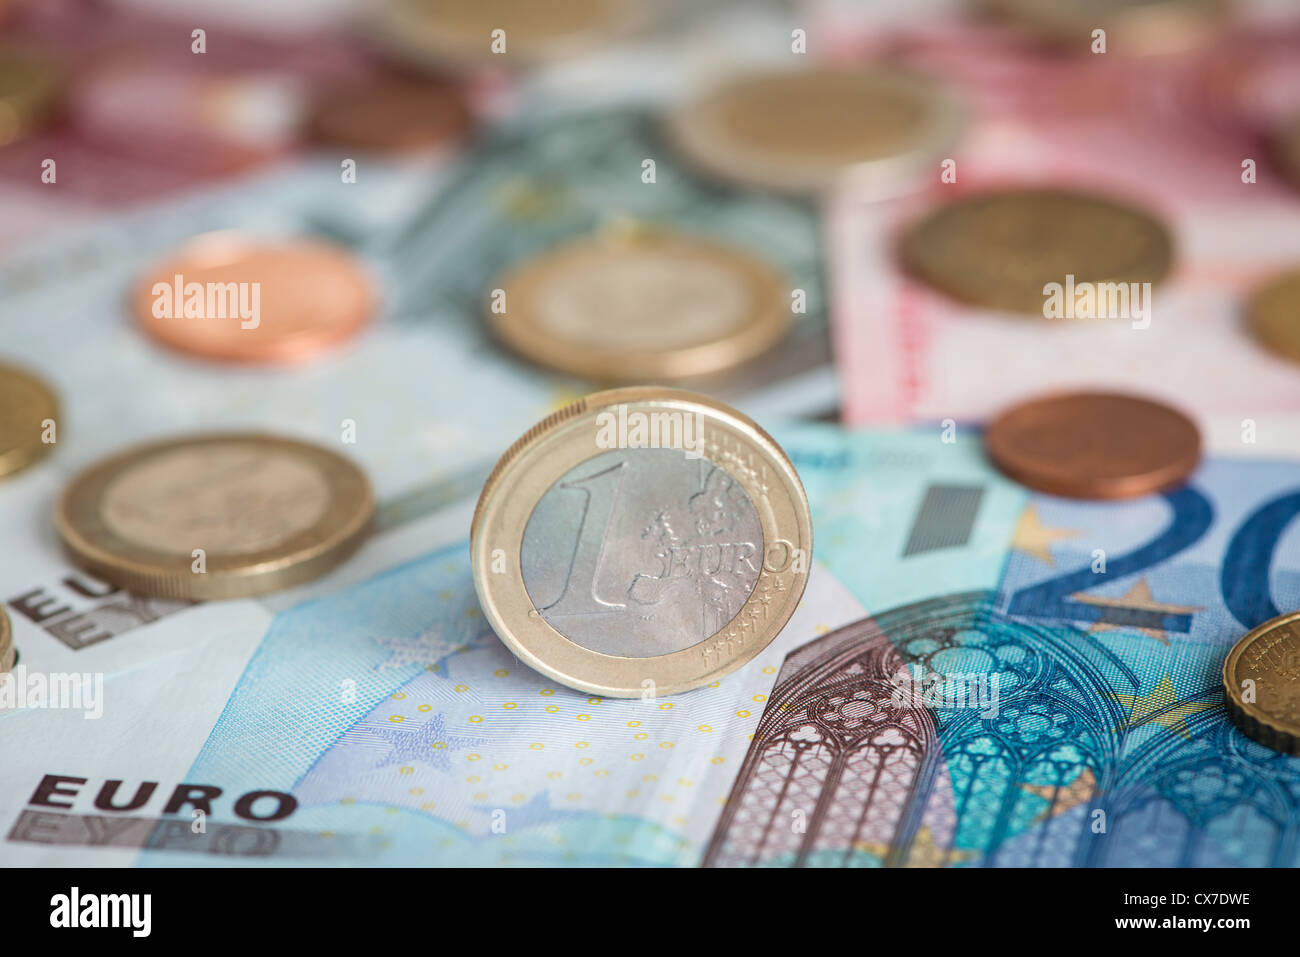 one euro coin standing on euro note Stock Photo